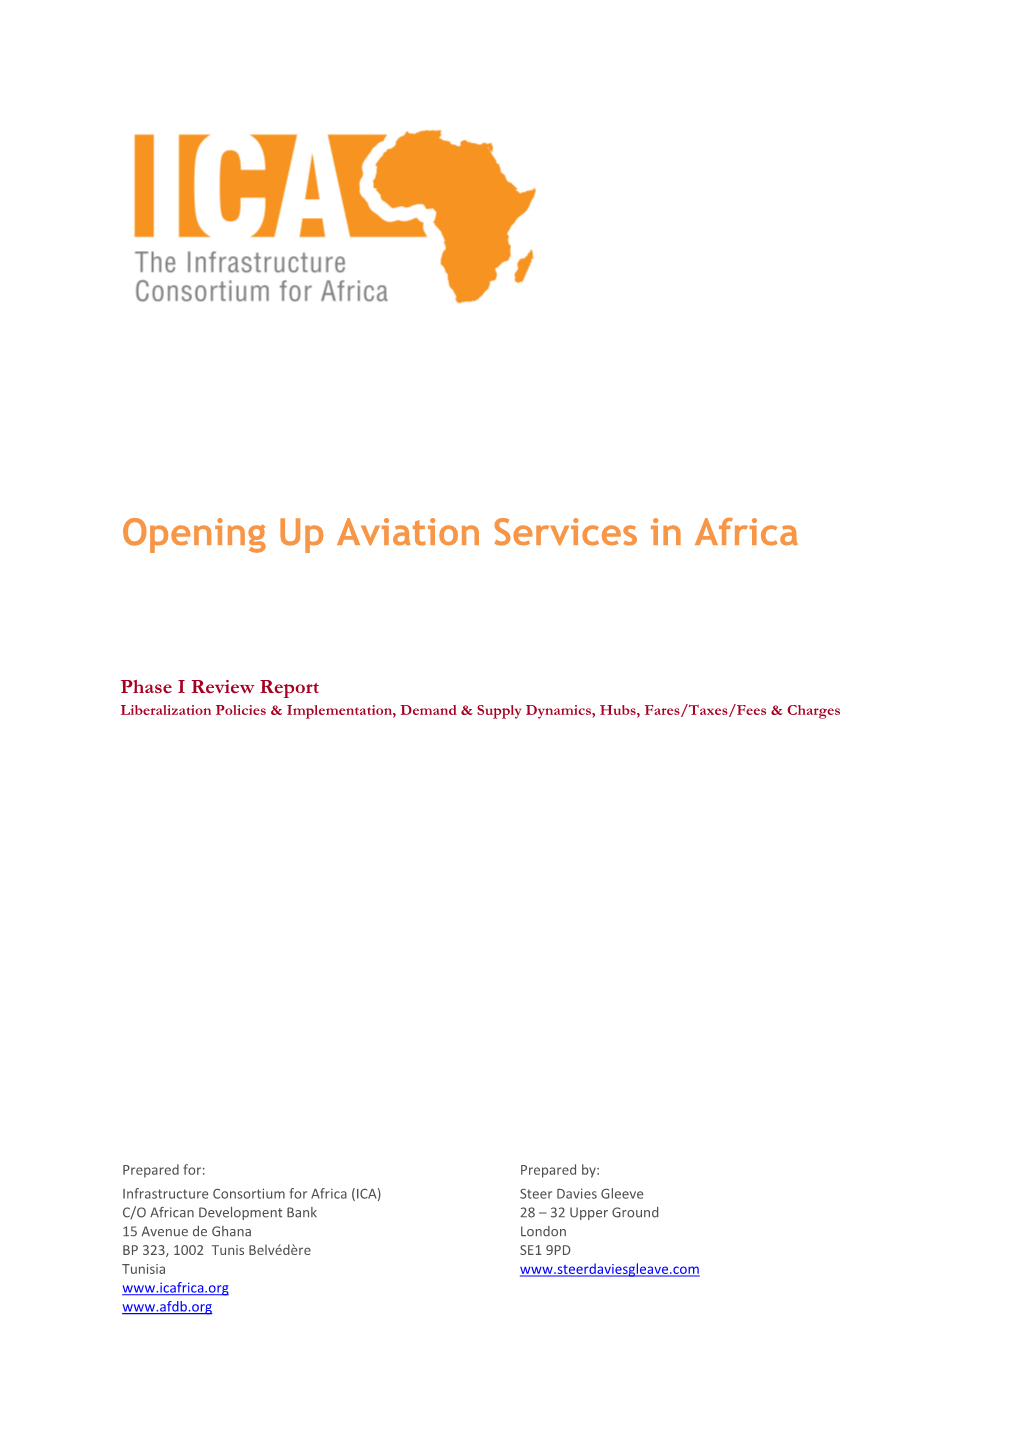 Opening up Aviation Services in Africa